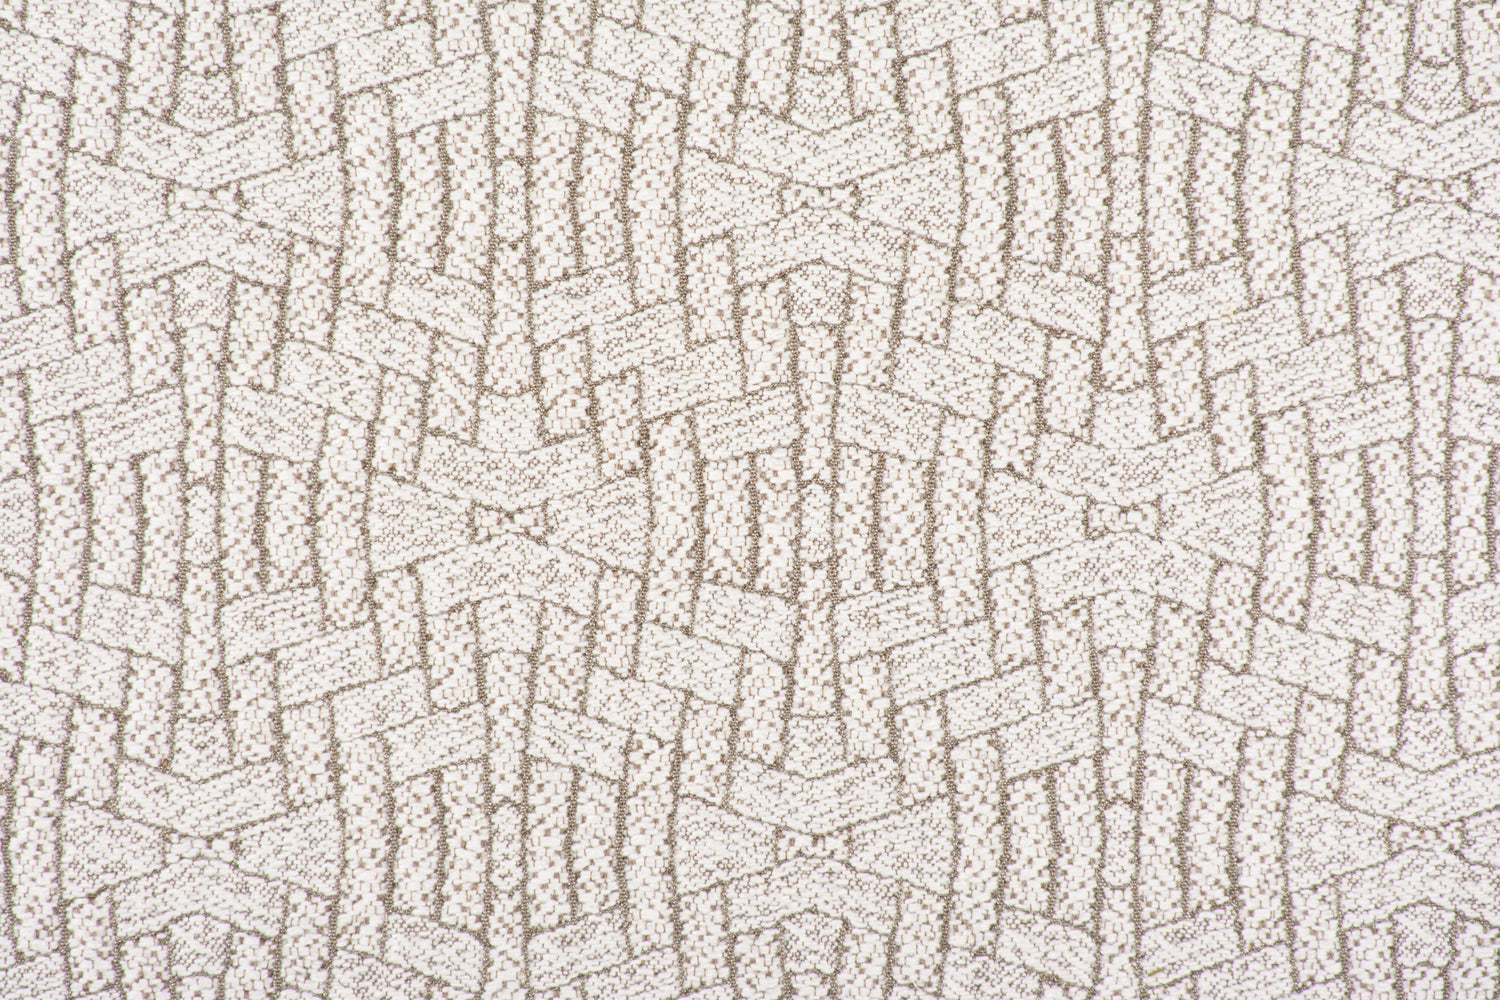 Pavimento fabric in birch color - pattern number MT 00037094 - by Scalamandre in the Old World Weavers collection